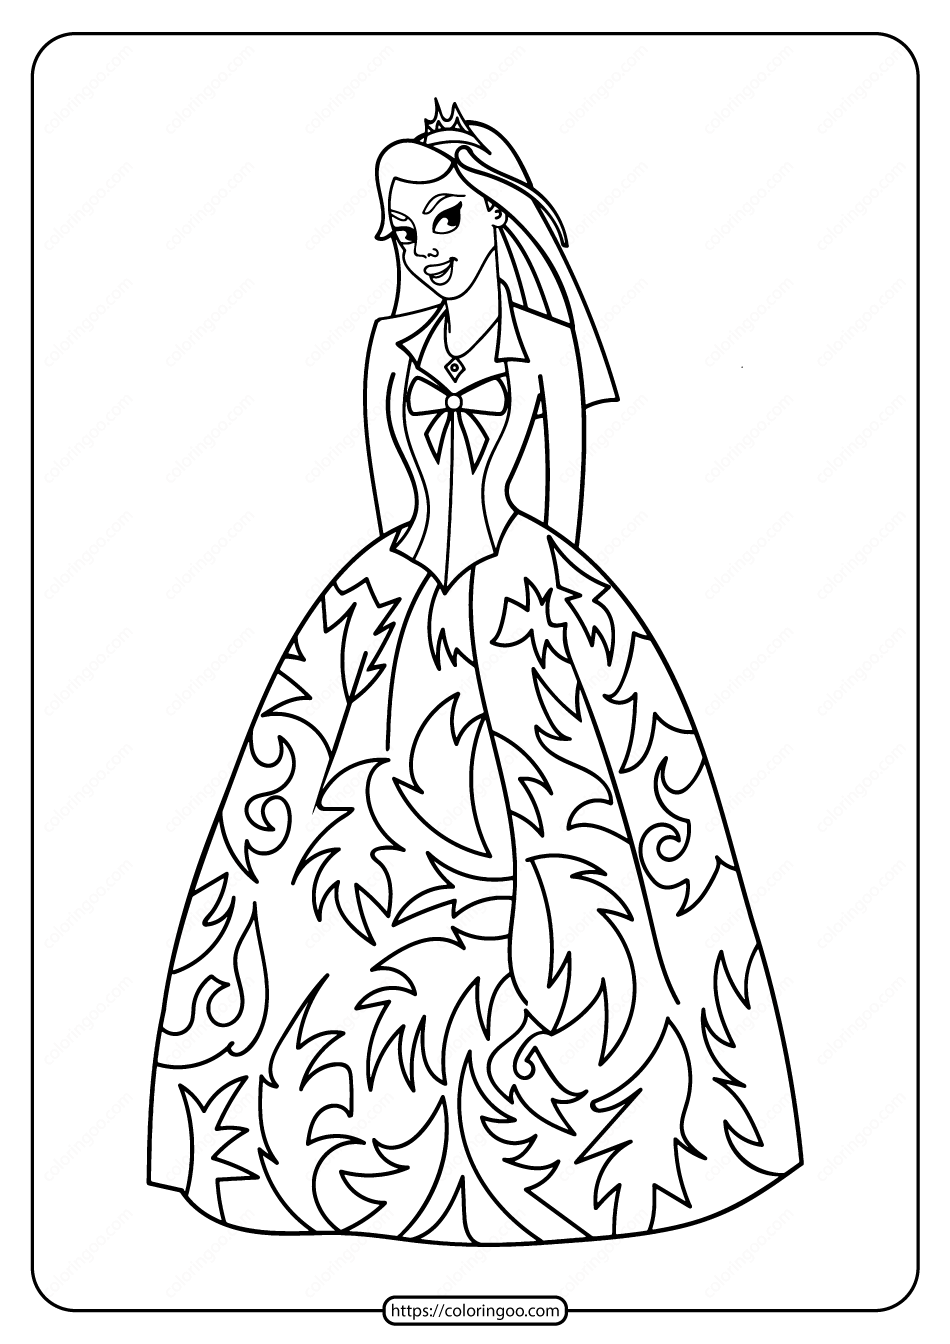 Fall Coloring Pages  FREE Printable PDF from PrimaryGames